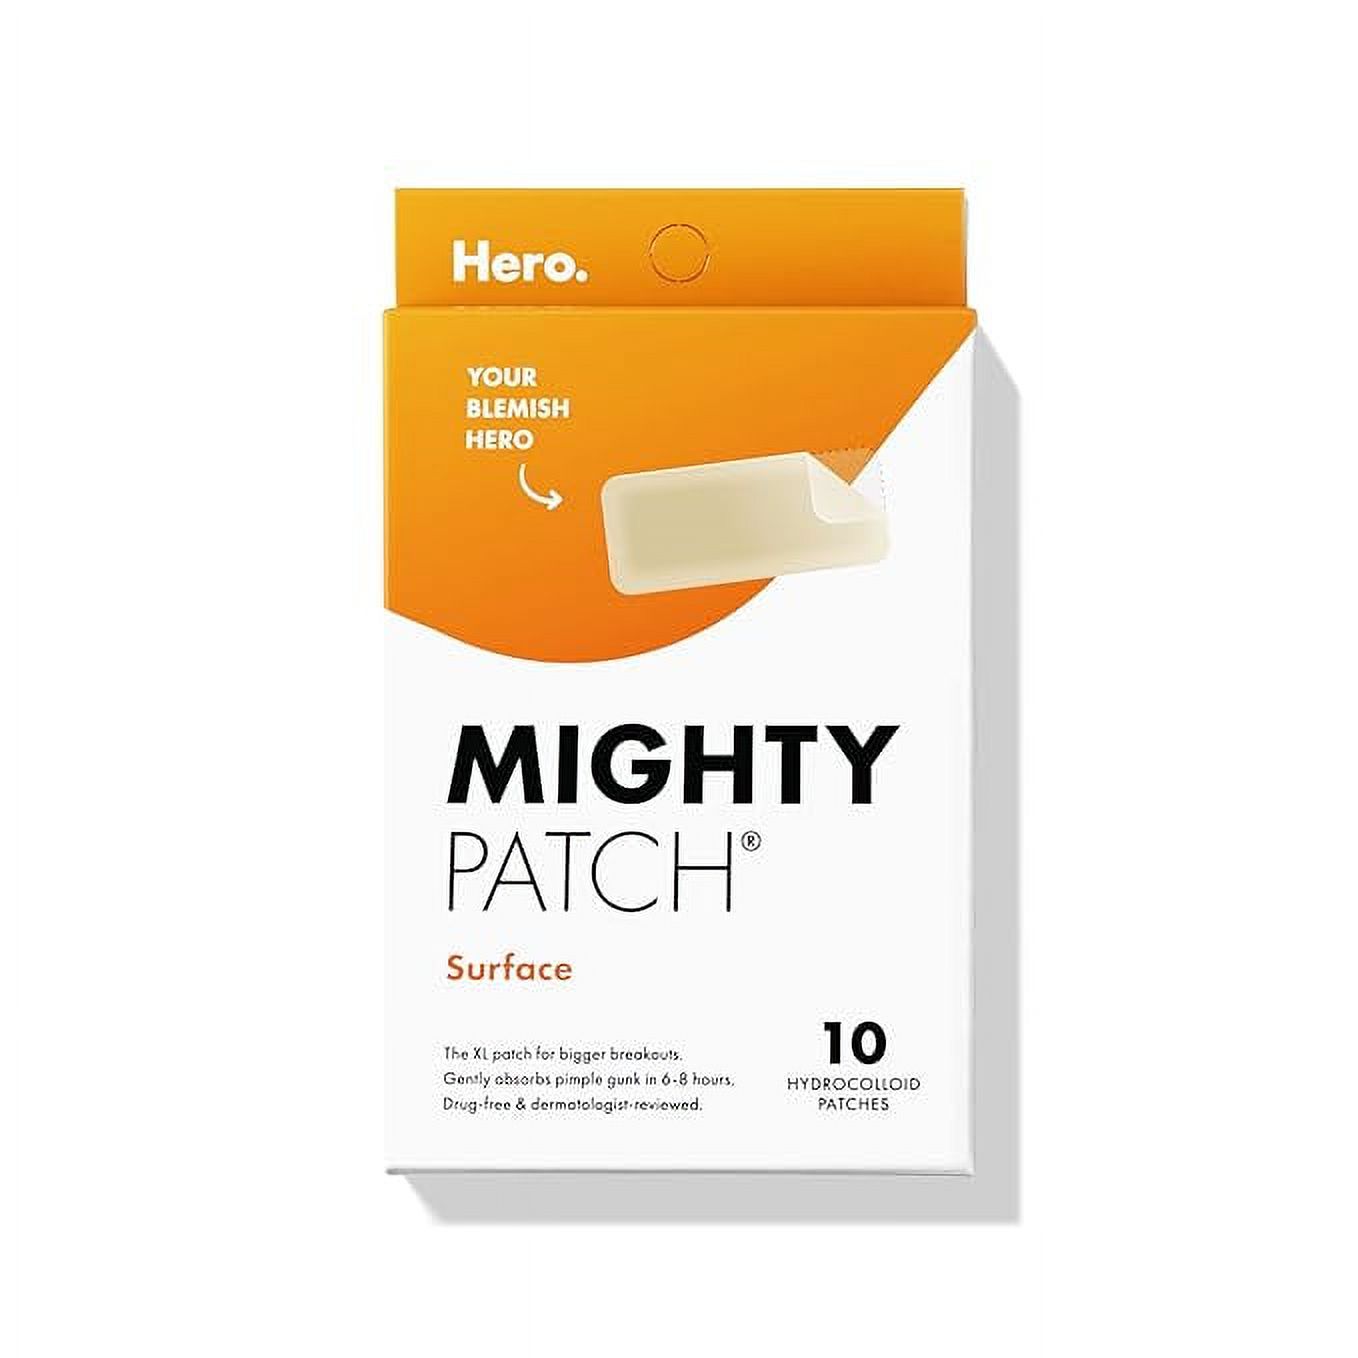 Mighty Patch™ Surface patch from Hero Cosmetics - XL Hydrocolloid Acne Patch (10 Count) - image 1 of 6